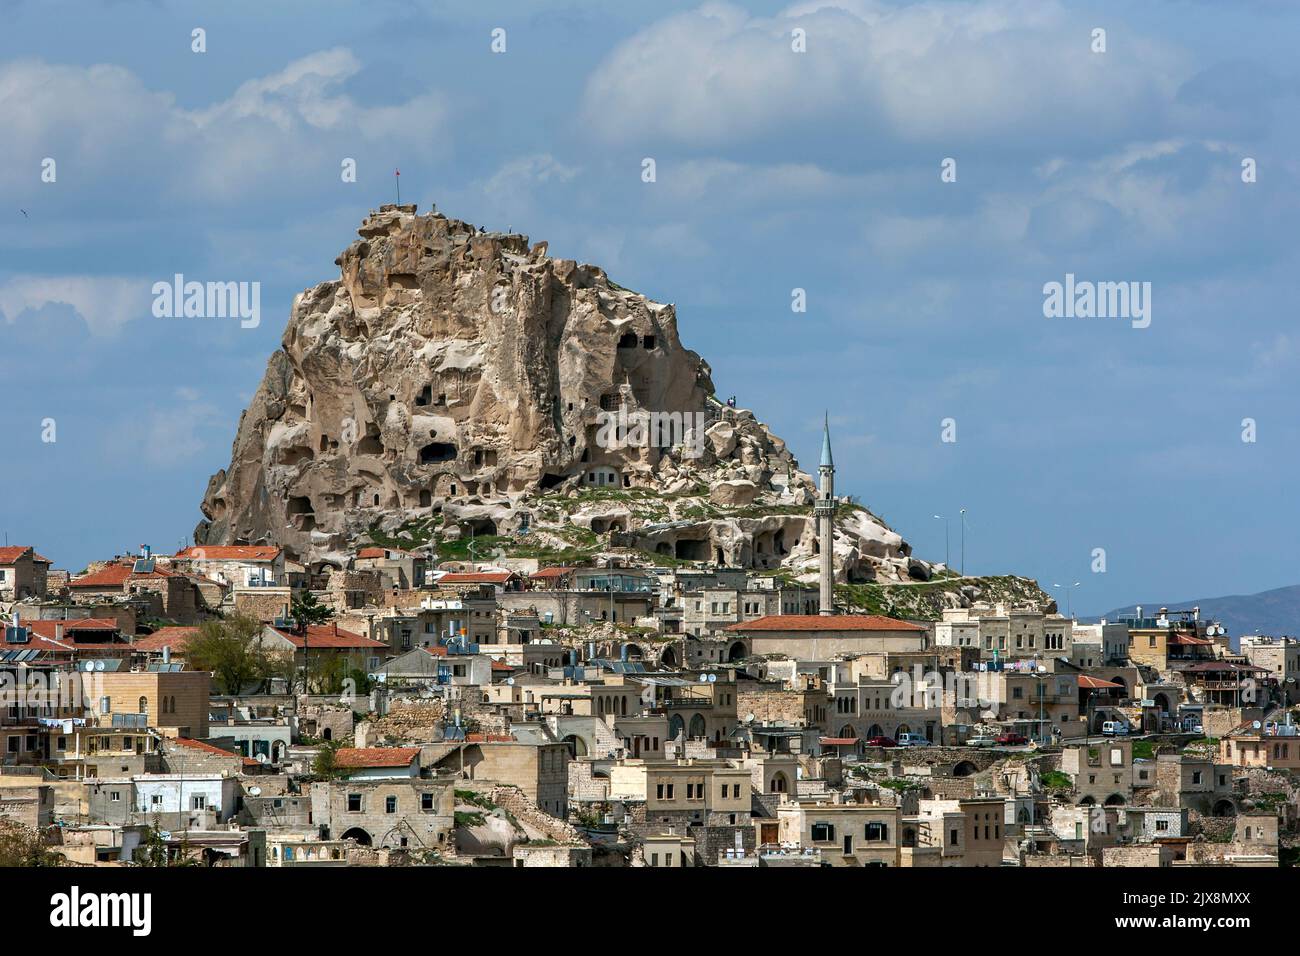 The volcanic rock outcrop known as Uchisar Castle at Uchisar in the Cappadocia region of Turkey. It has ancient tunnels and stairways. Stock Photo